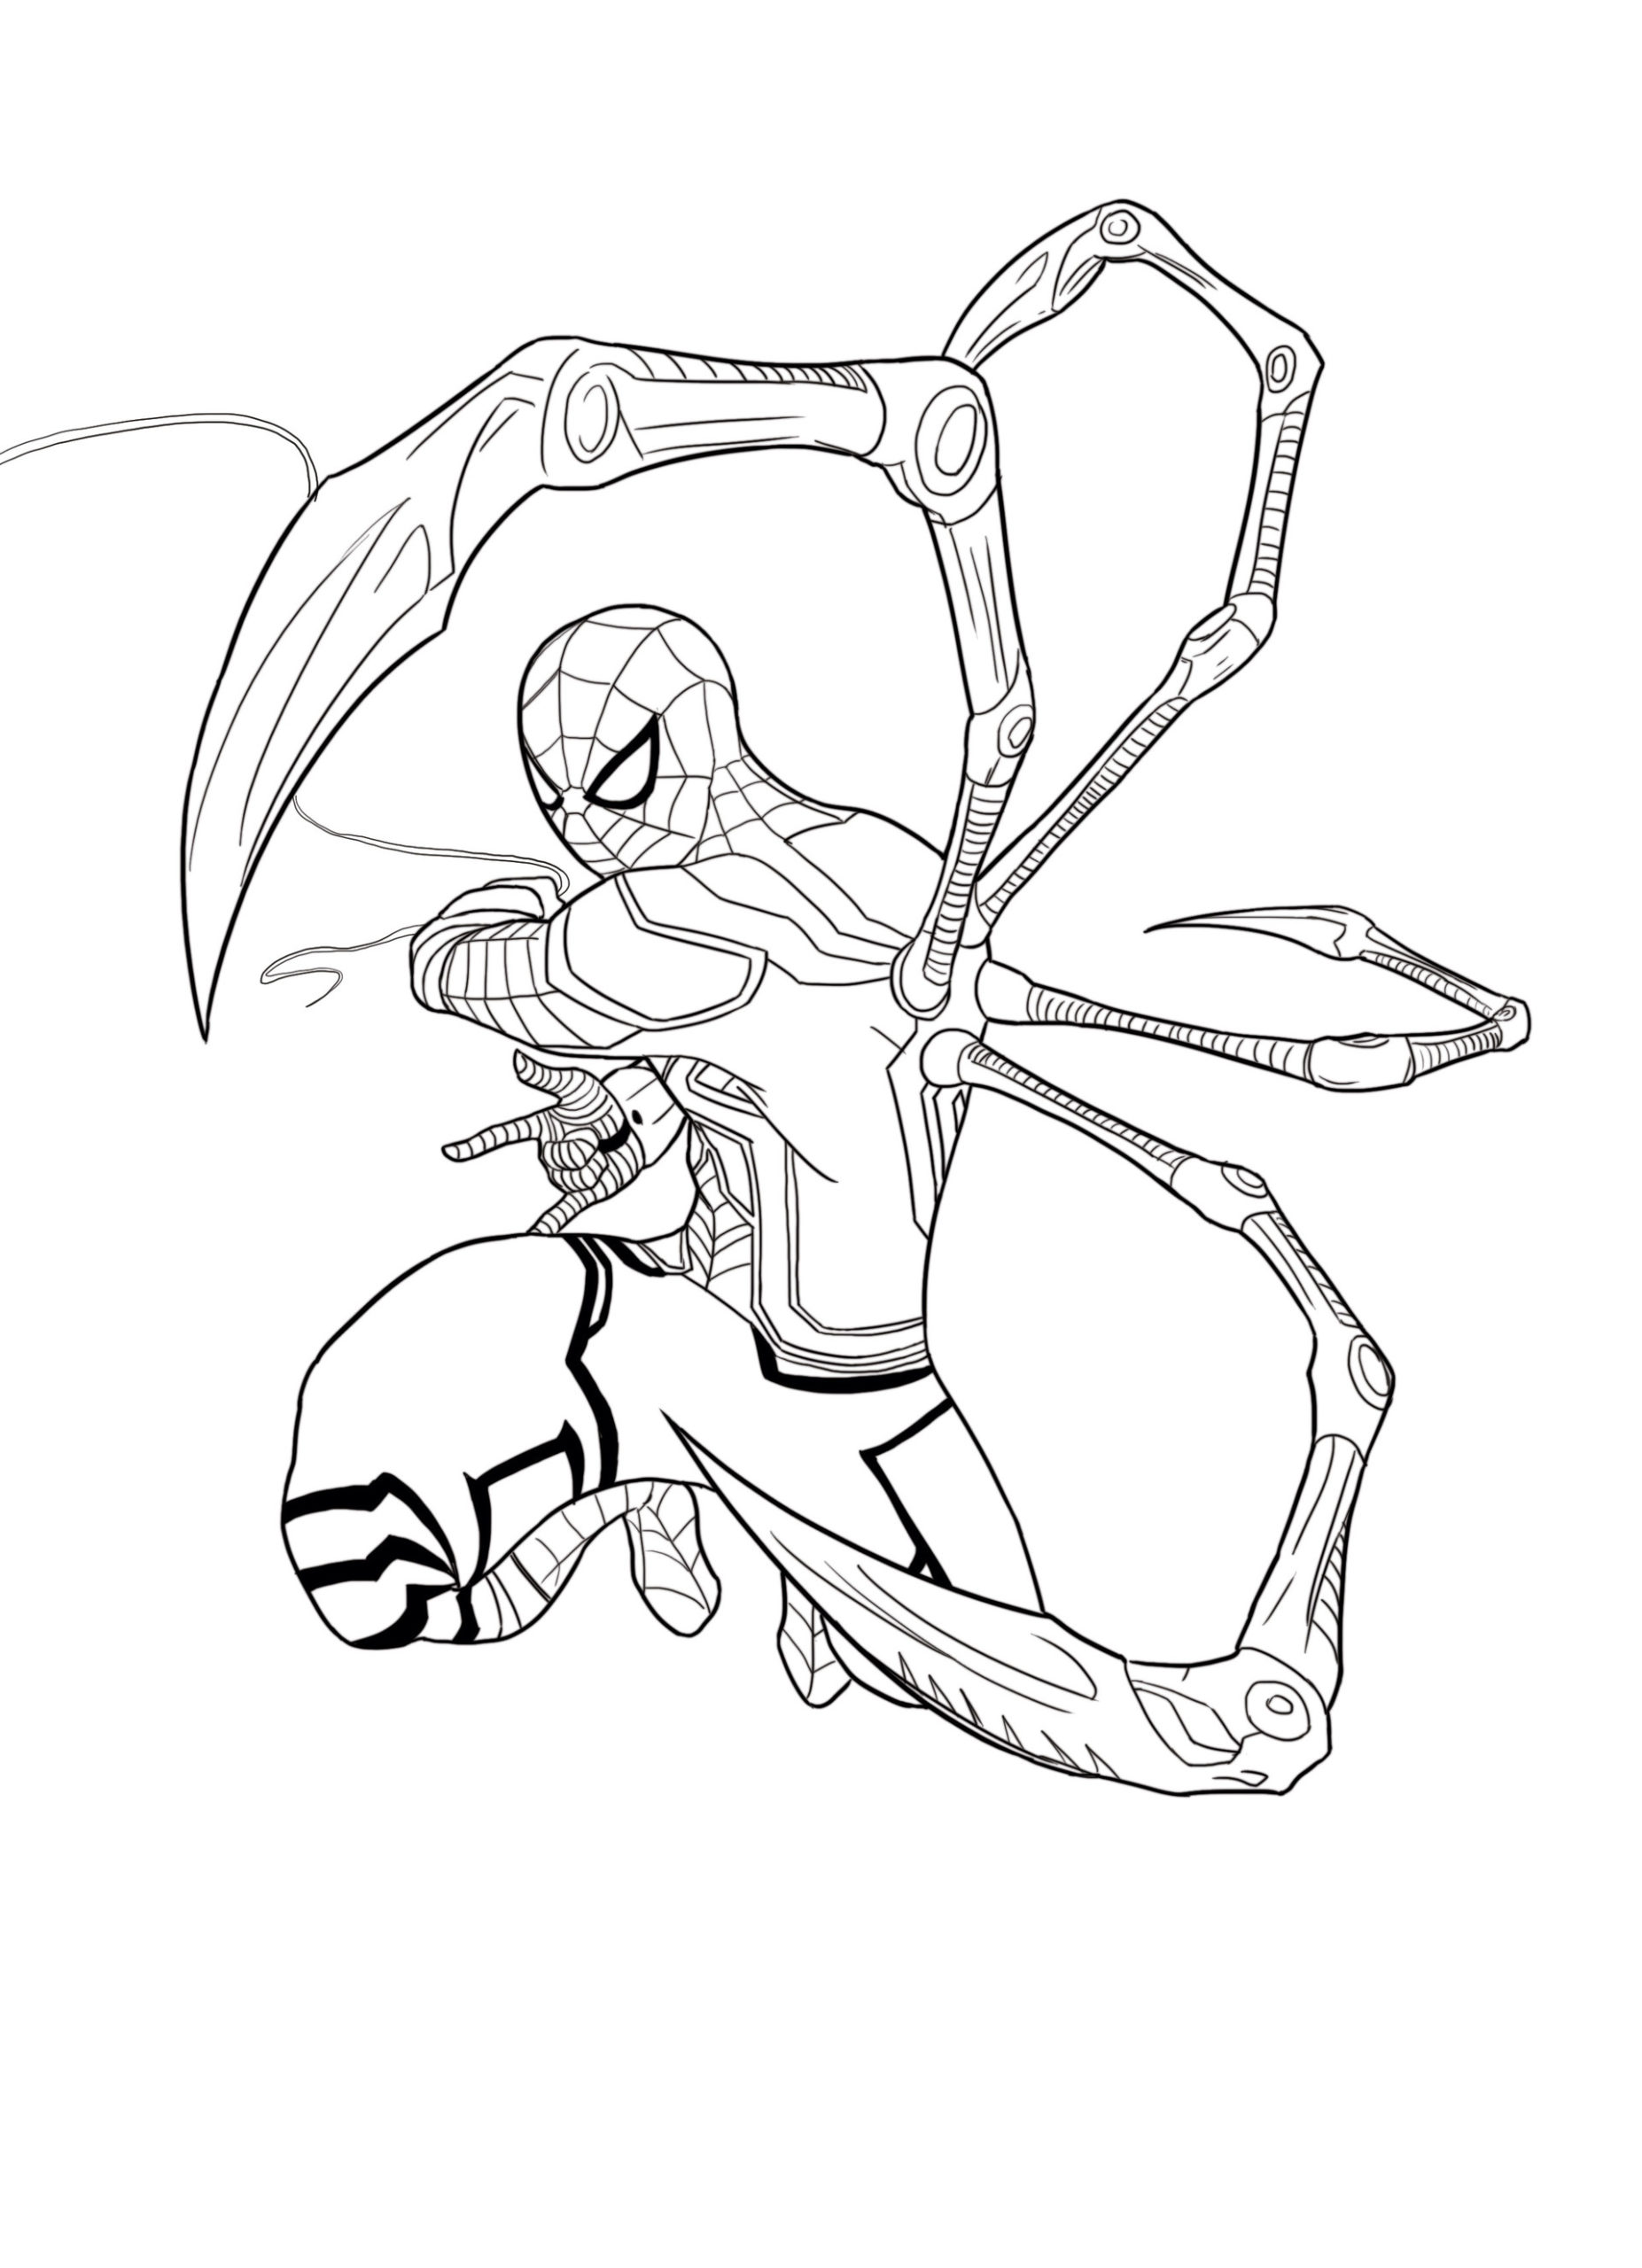 Iron Spiderman Coloring Page New Picture Free Printable Coloring Home